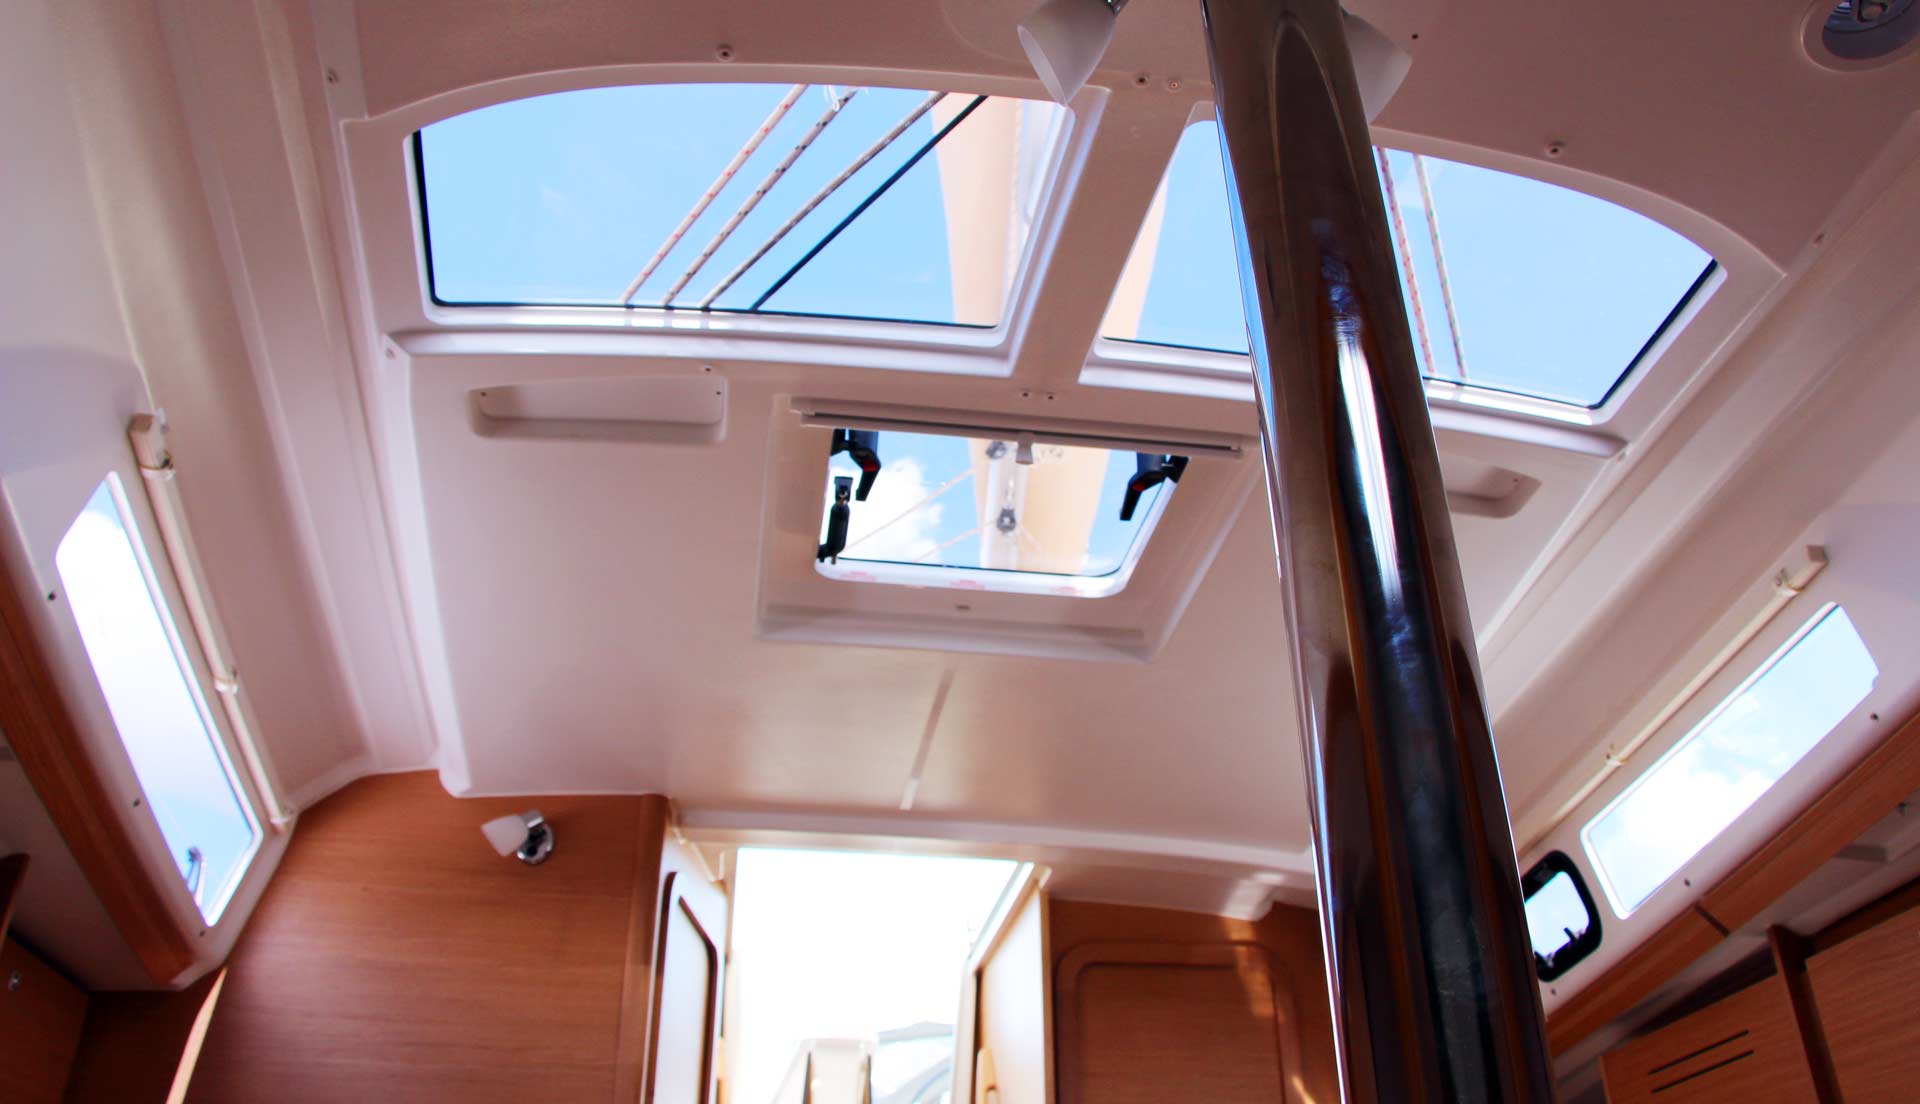 This yacht is light-flooded - pure joy!